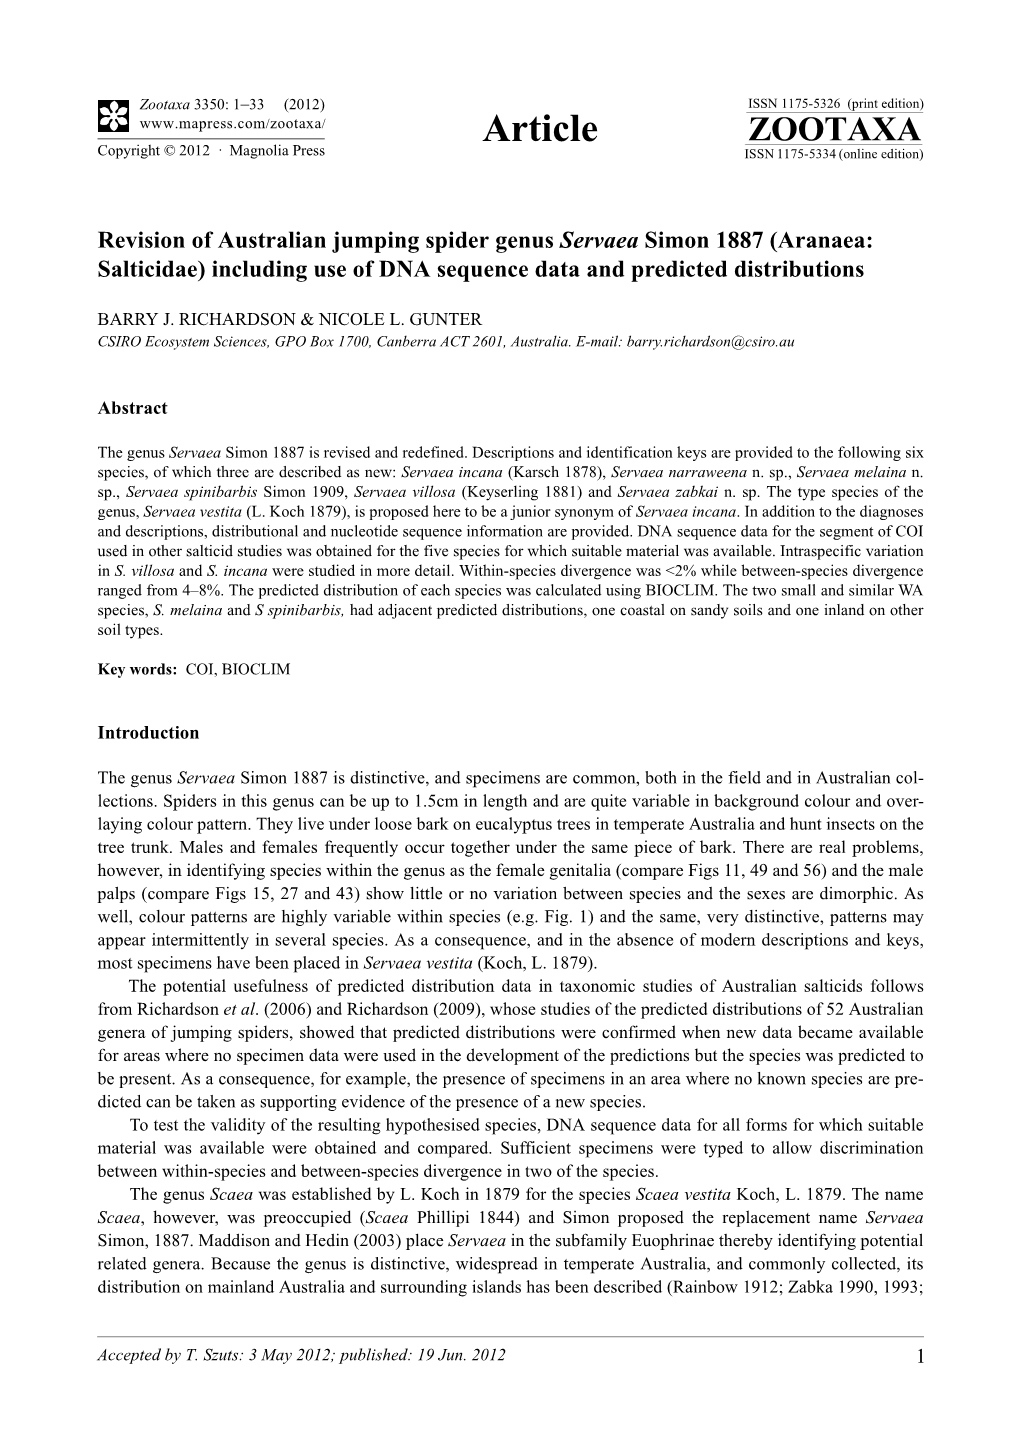 Revision of Australian Jumping Spider Genus Servaea Simon 1887 (Aranaea: Salticidae) Including Use of DNA Sequence Data and Predicted Distributions